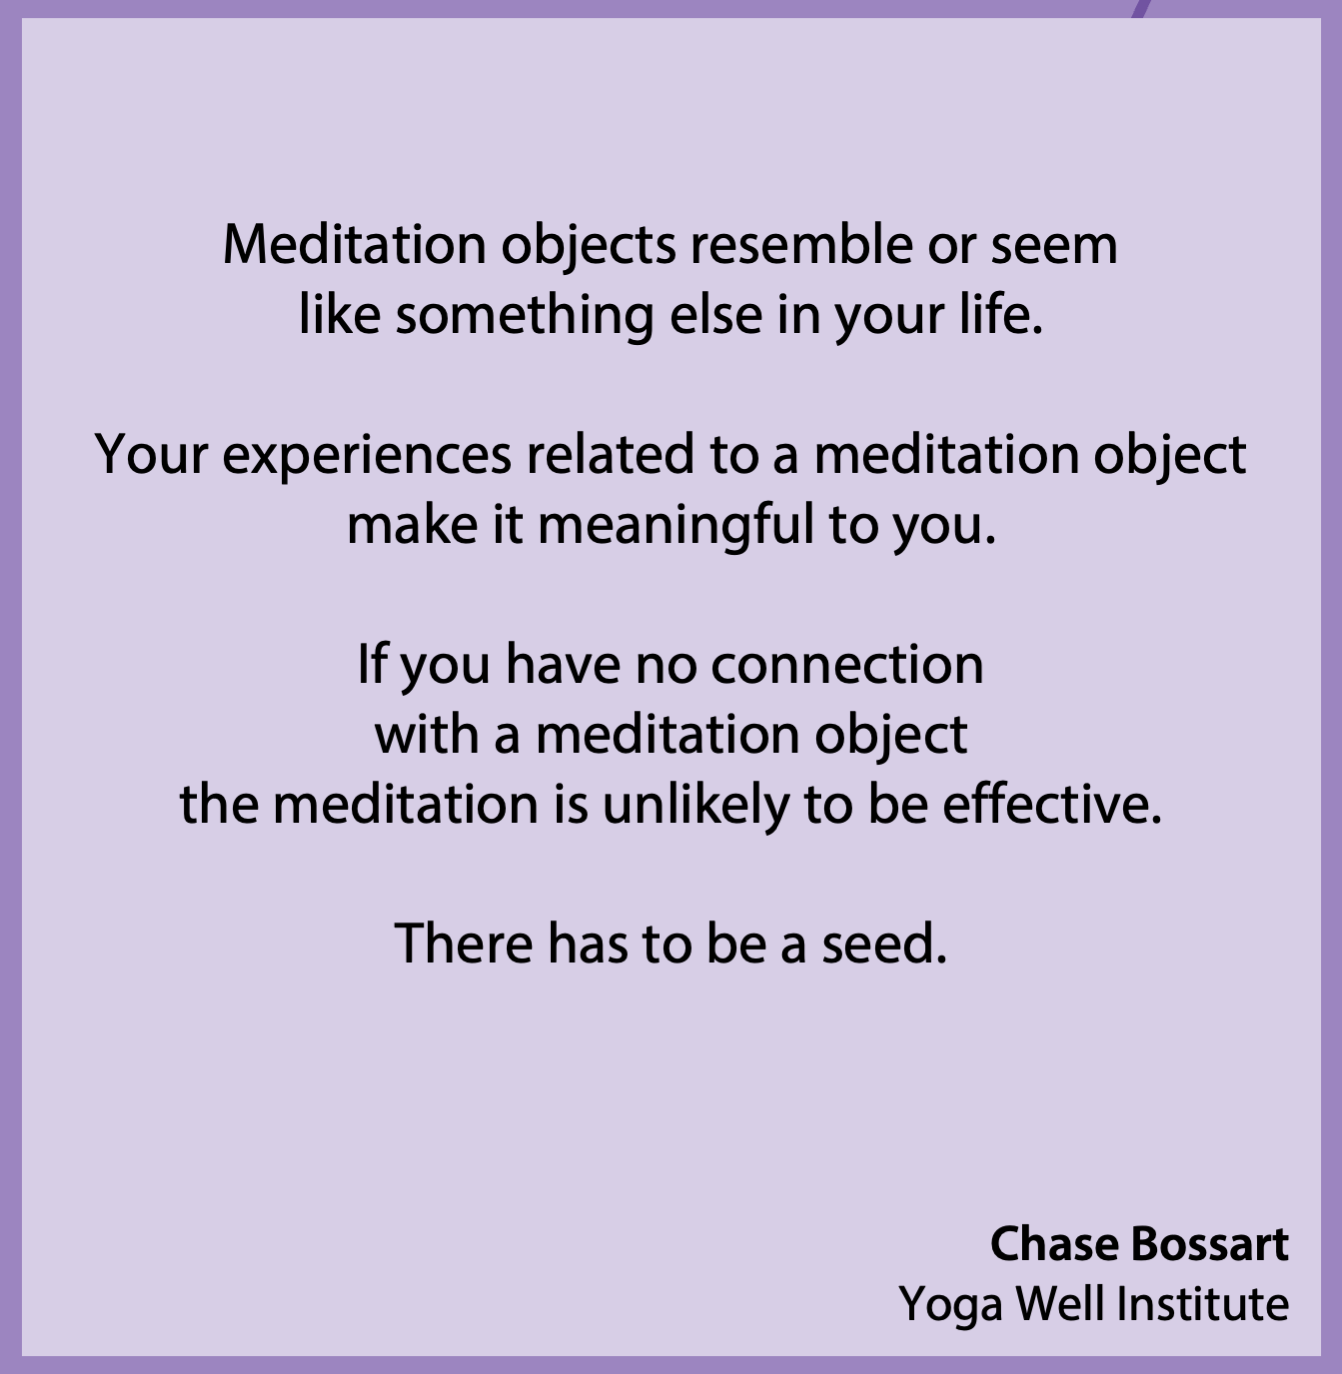 Meditation objects resemble or seem like something else in your life. Your experiences related to a meditation object make it meaningful to you. If you have no connection with a meditation object, the meditation is unlikely to be effective. There has to be a seed. – Chase Bossart, Yoga Well Institute